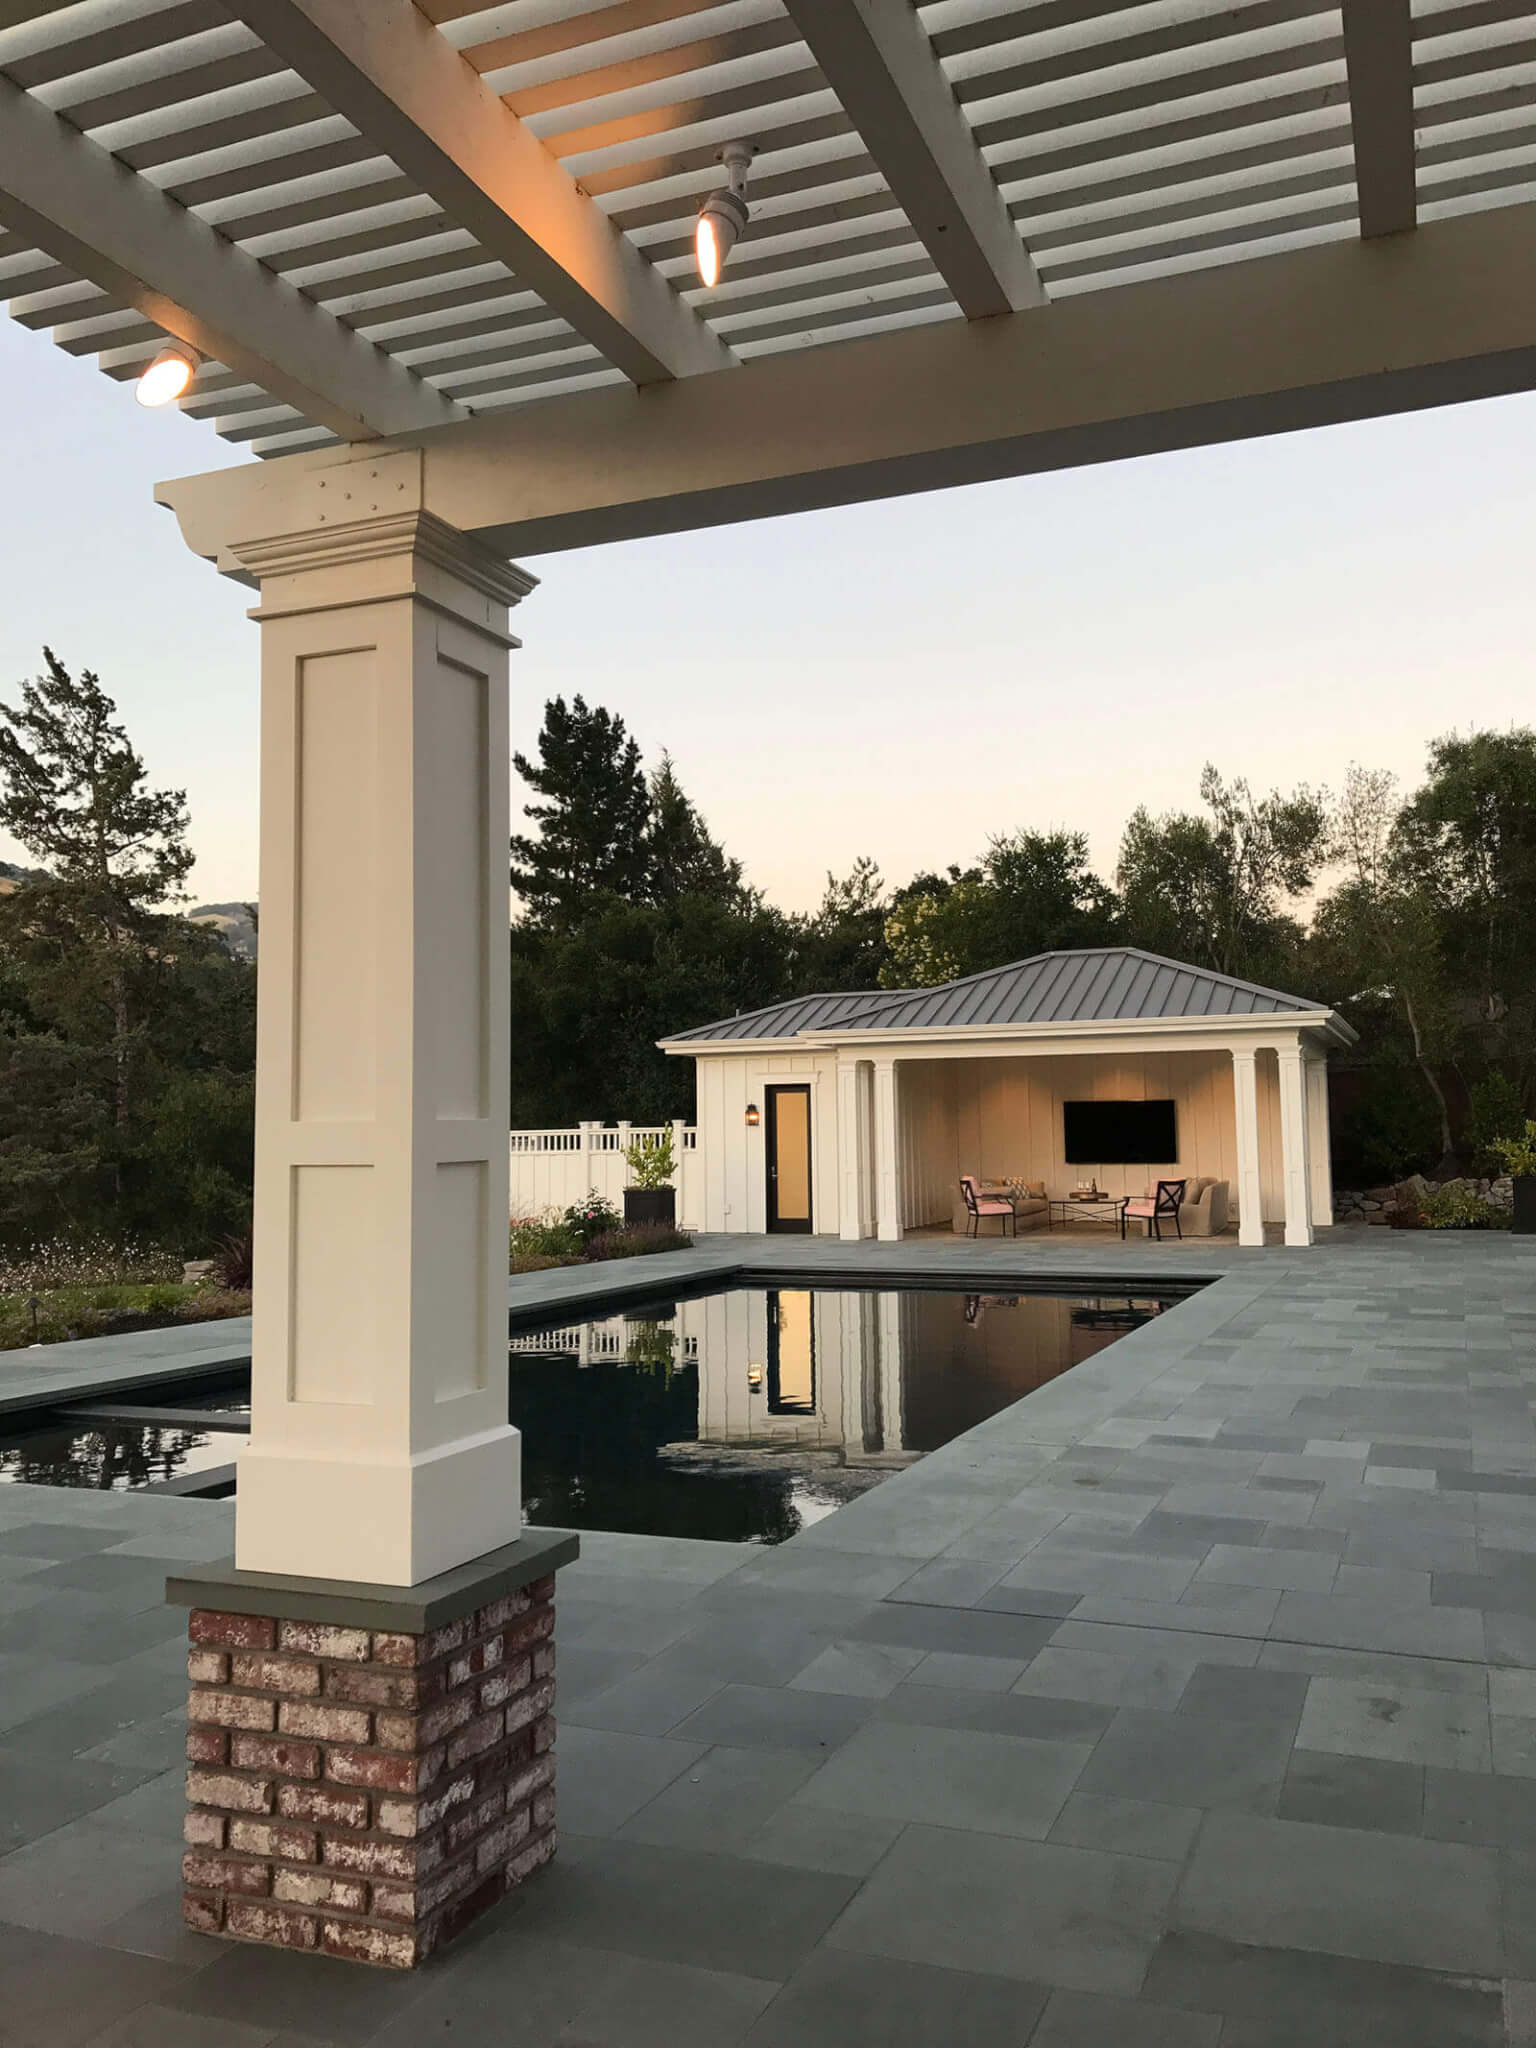 Covered lounge as seen through the posts of a matching wood pergola with brick detailing, on a bluestone patio with seamless contemporary pool and spa